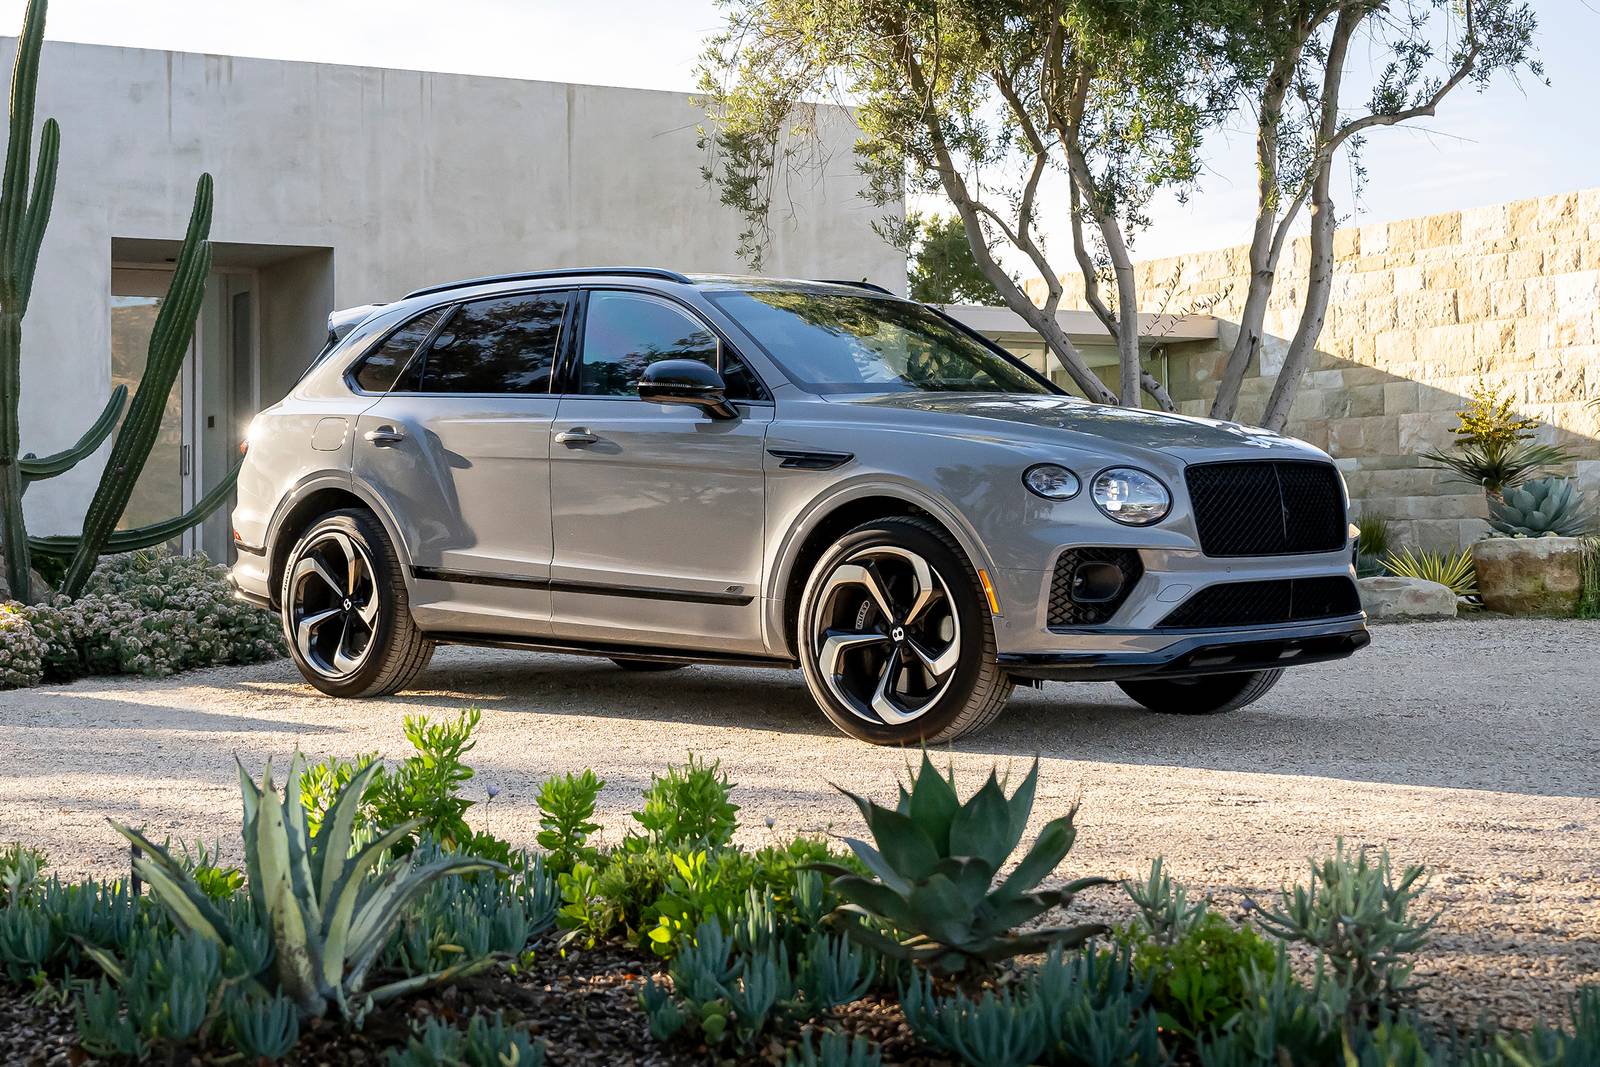 2022 Bentley Bentayga Prices, Reviews, and Pictures | Edmunds